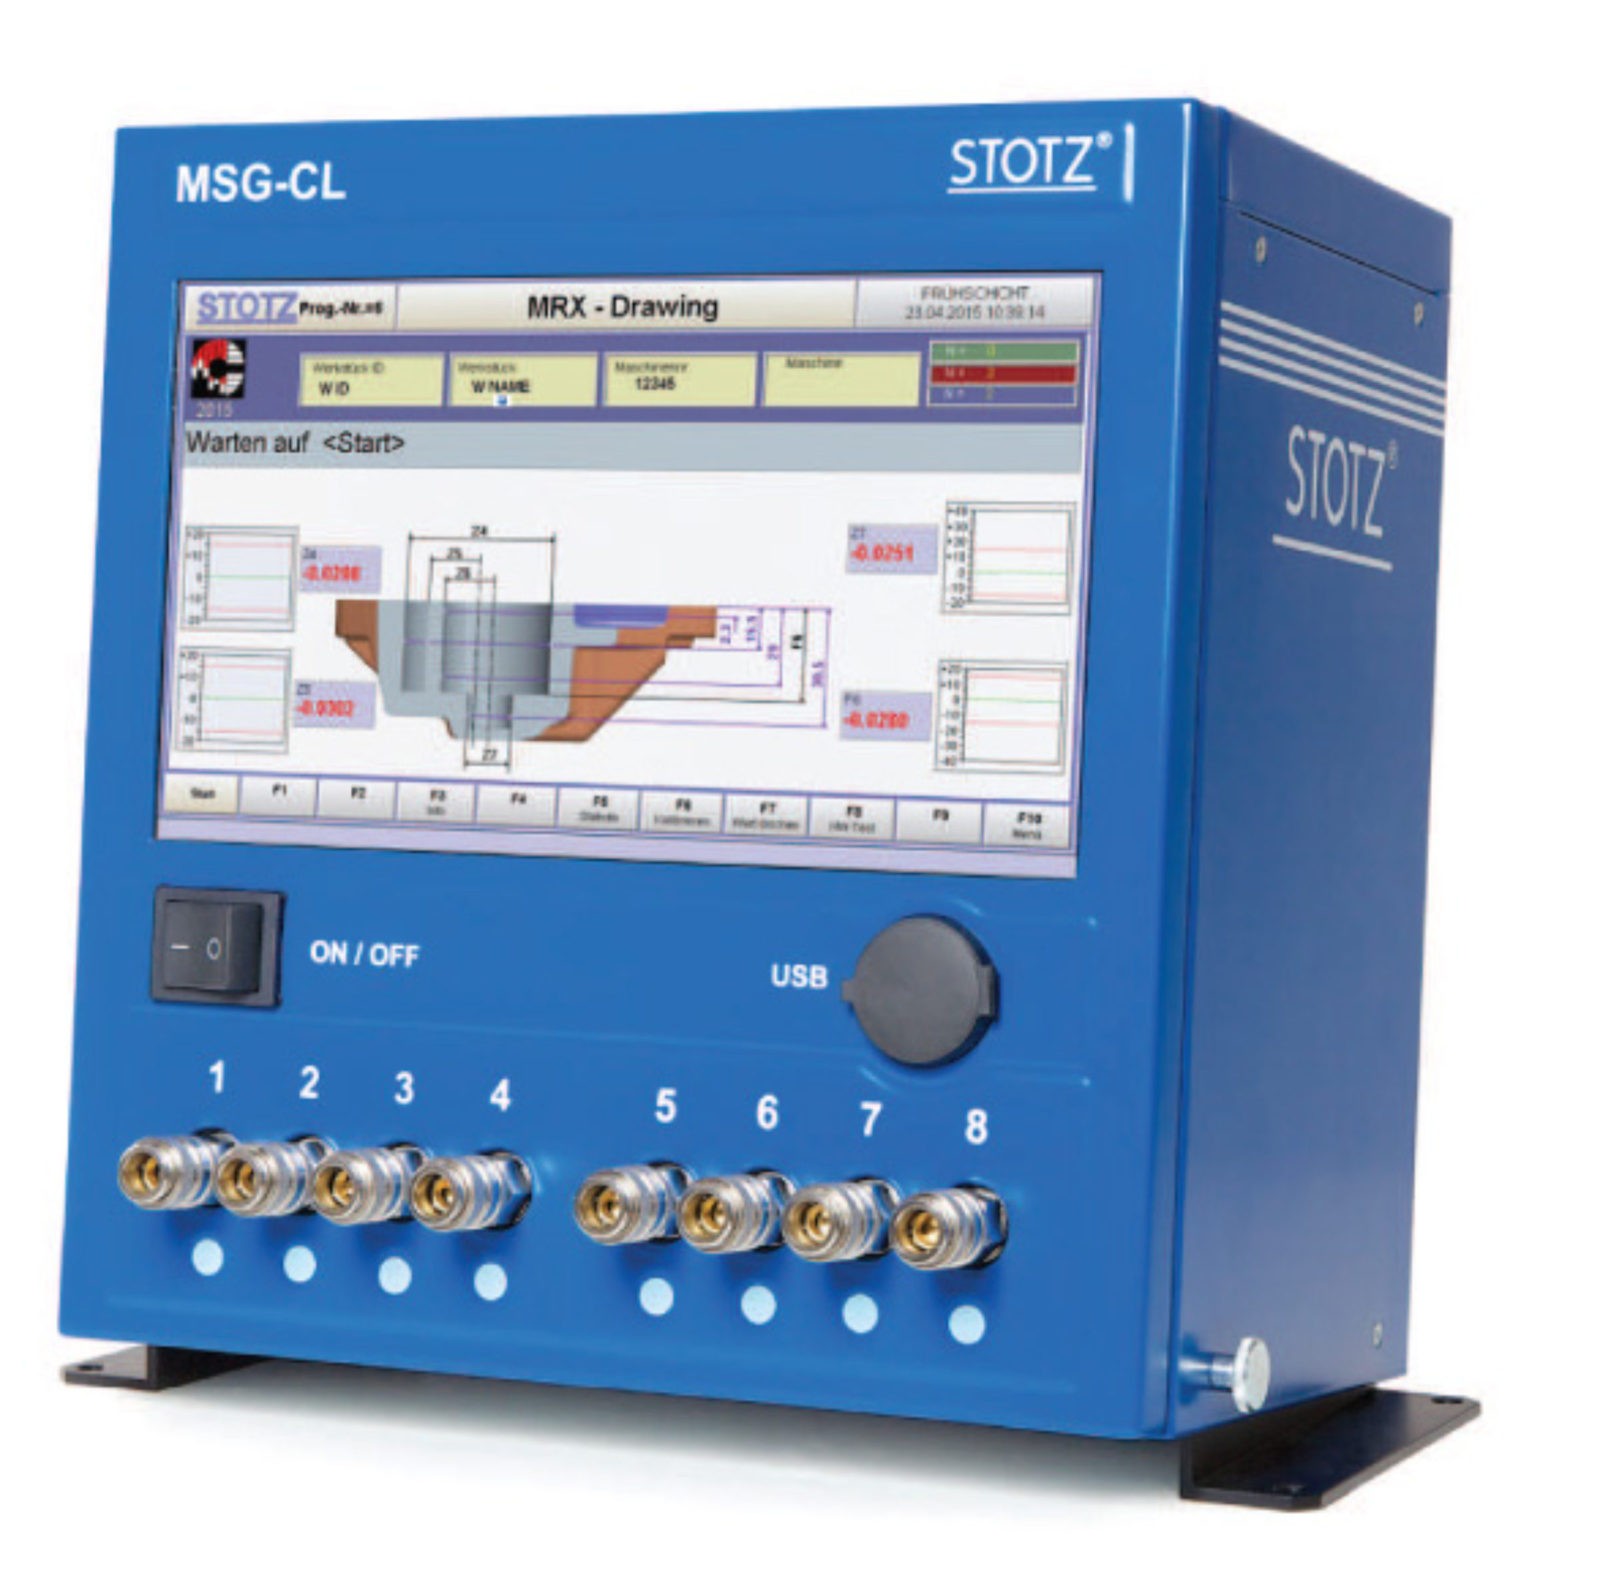 Stotz MSG-CL with 8 pneumatic channels